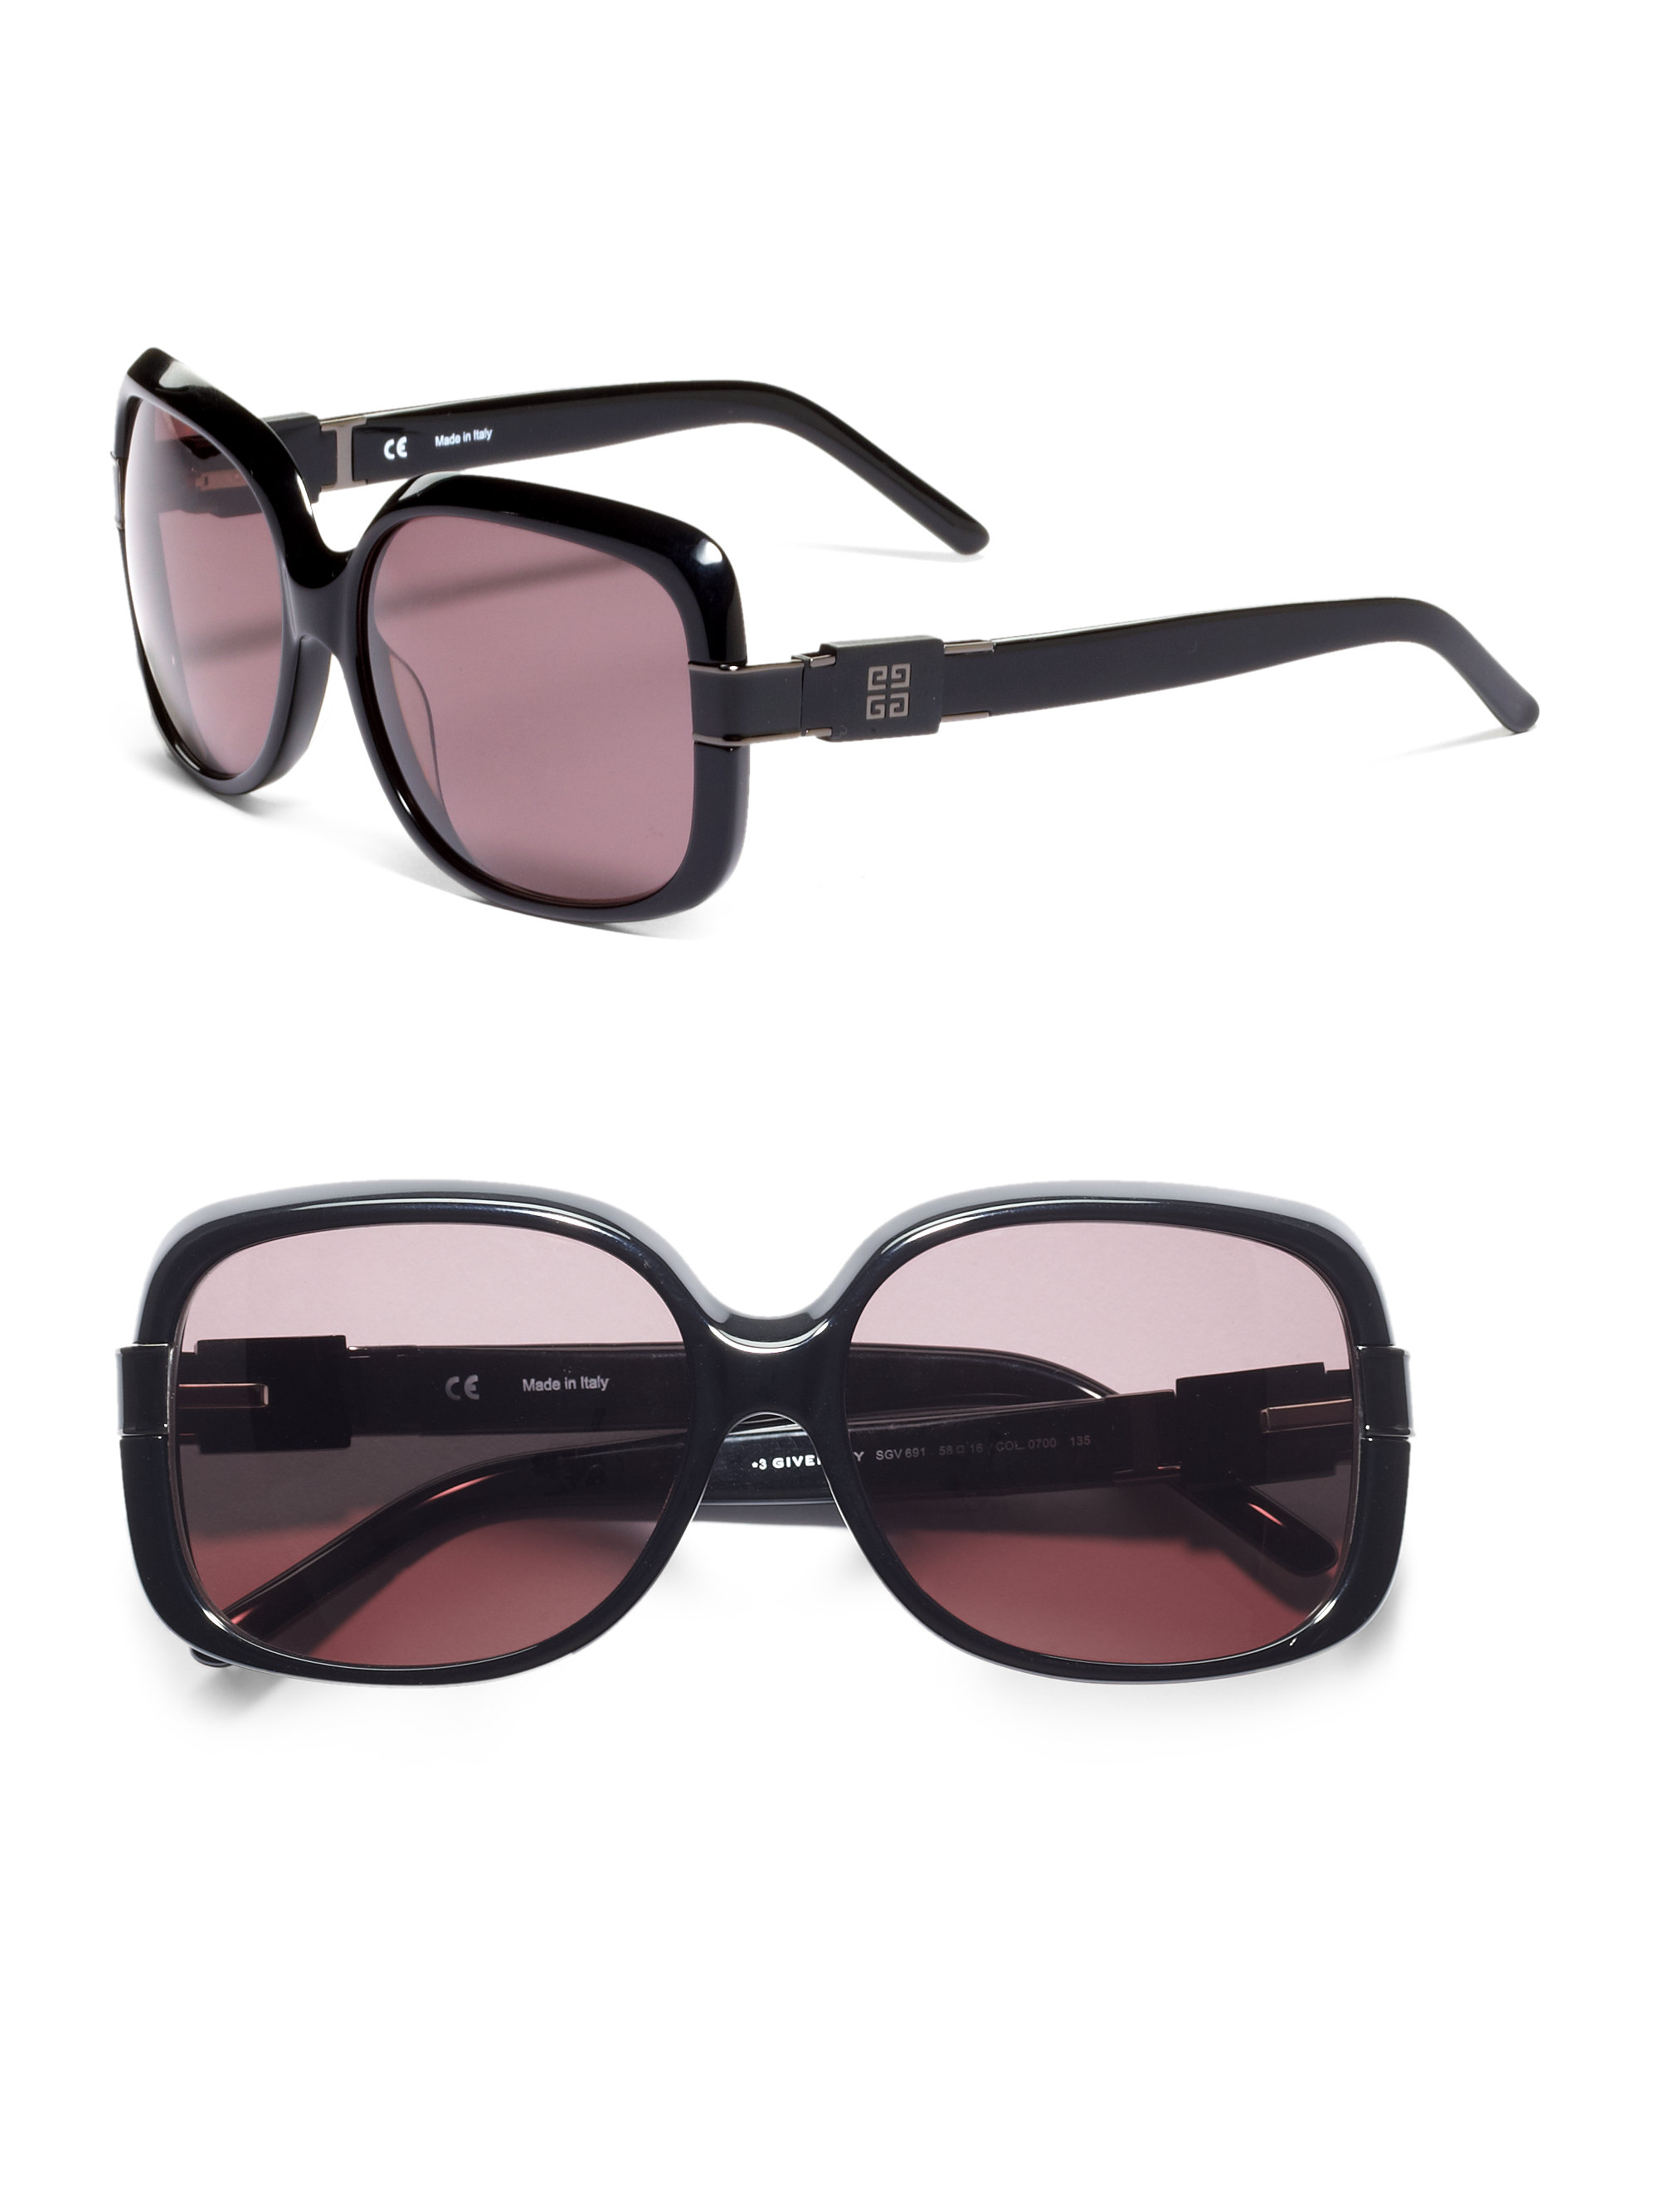 Givenchy Oversized Rectangular Sunglasses in Black - Lyst